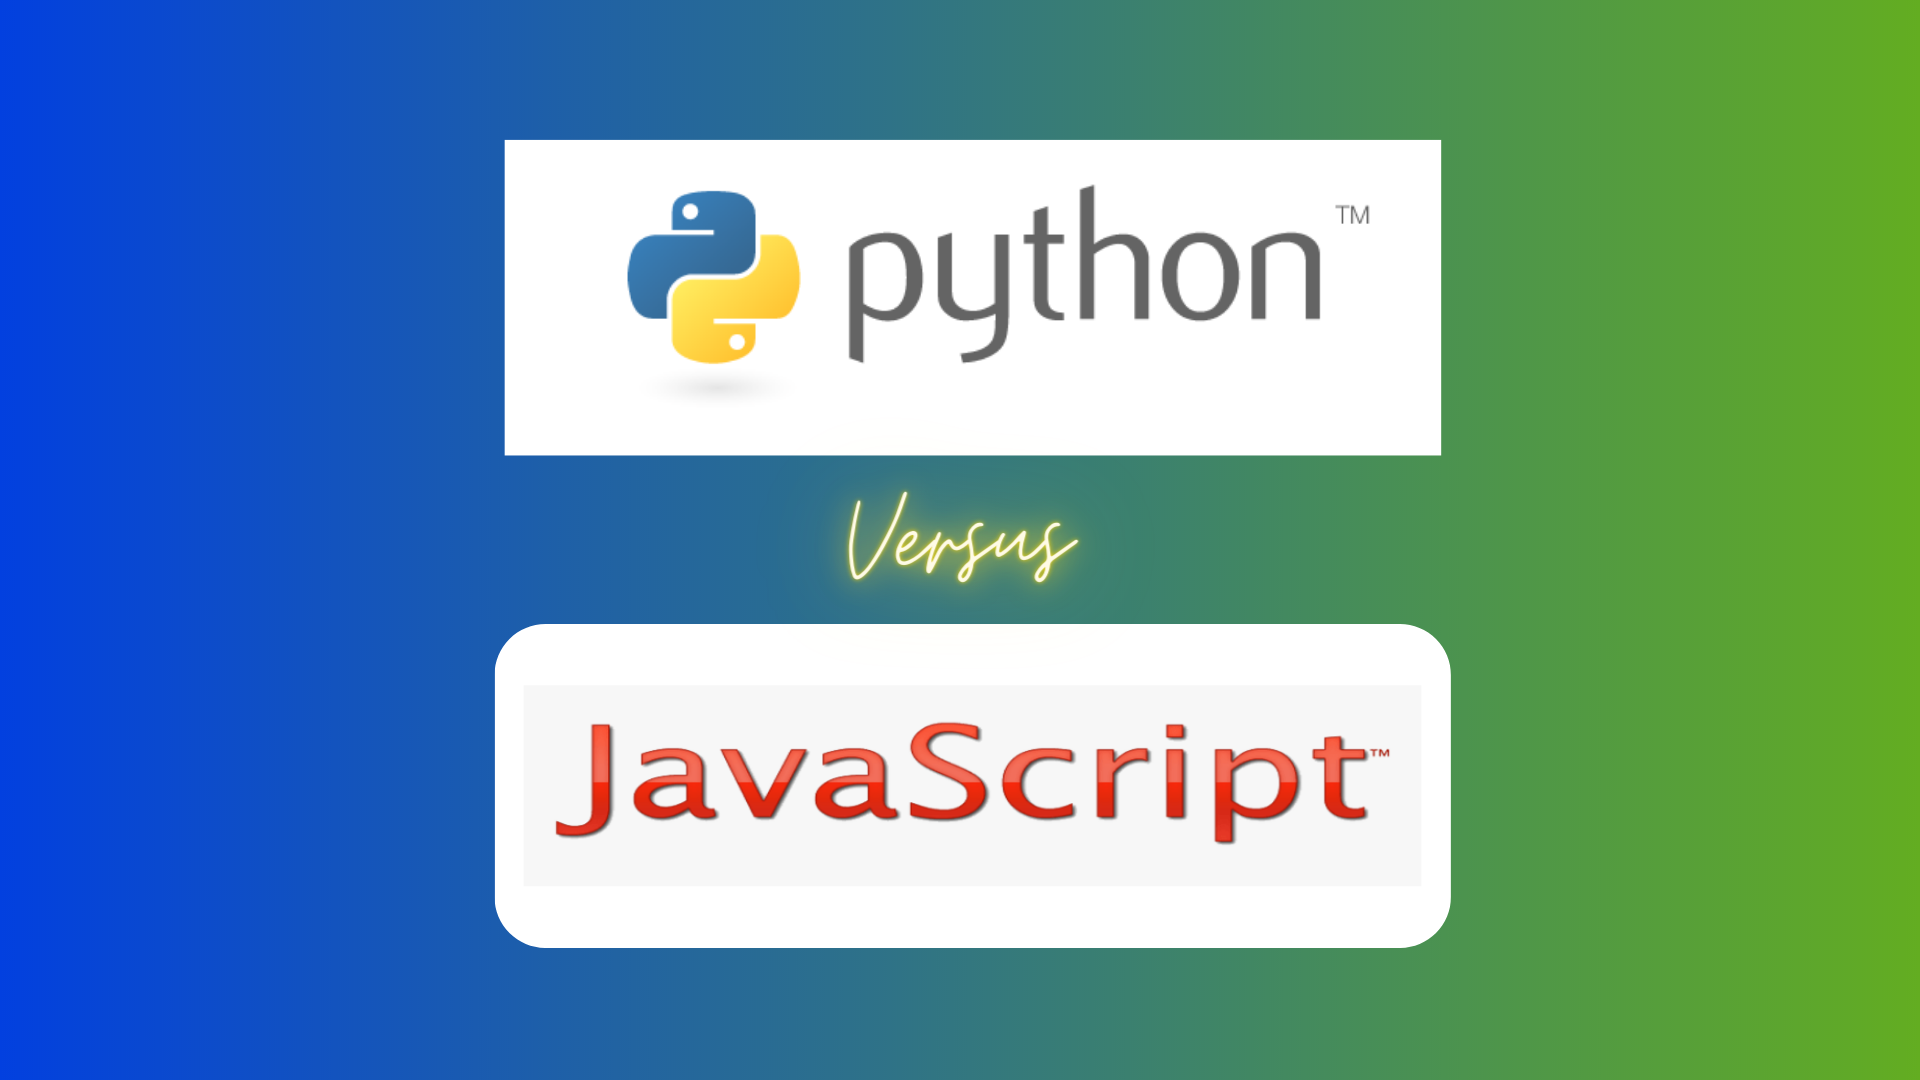 Python vs JavaScript on a blended blue and green background